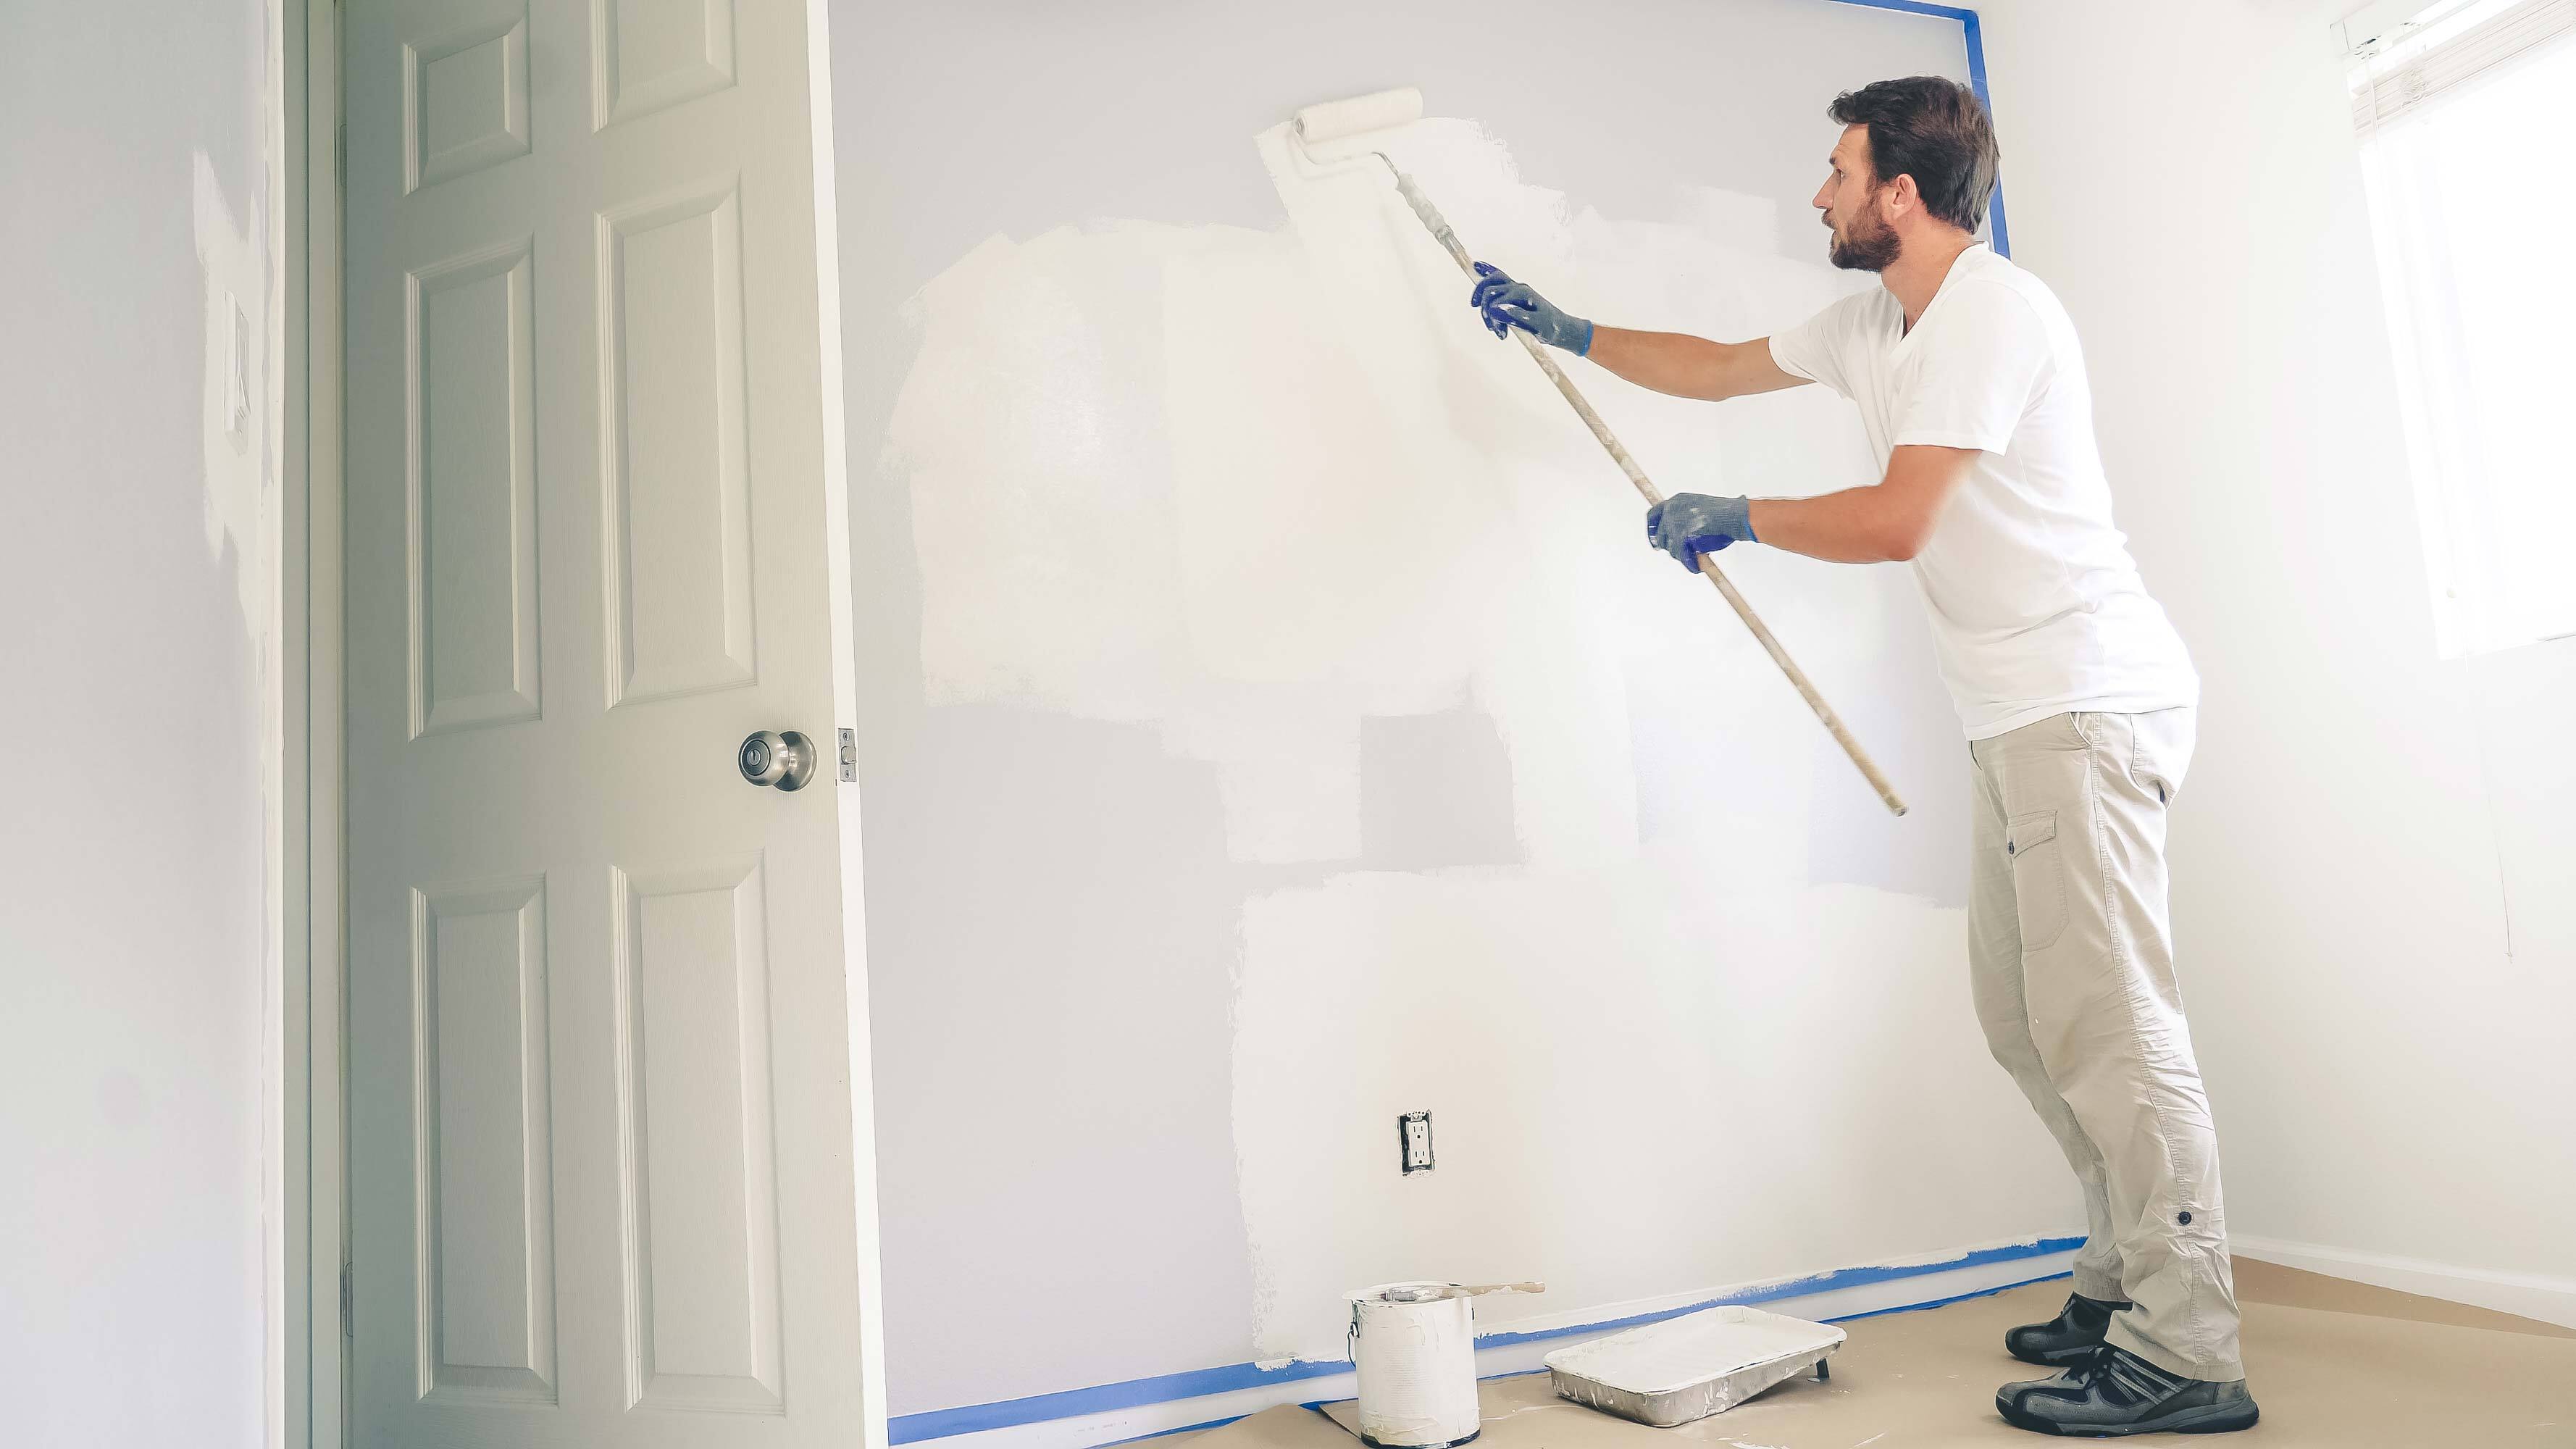 Person painting interior room walls.